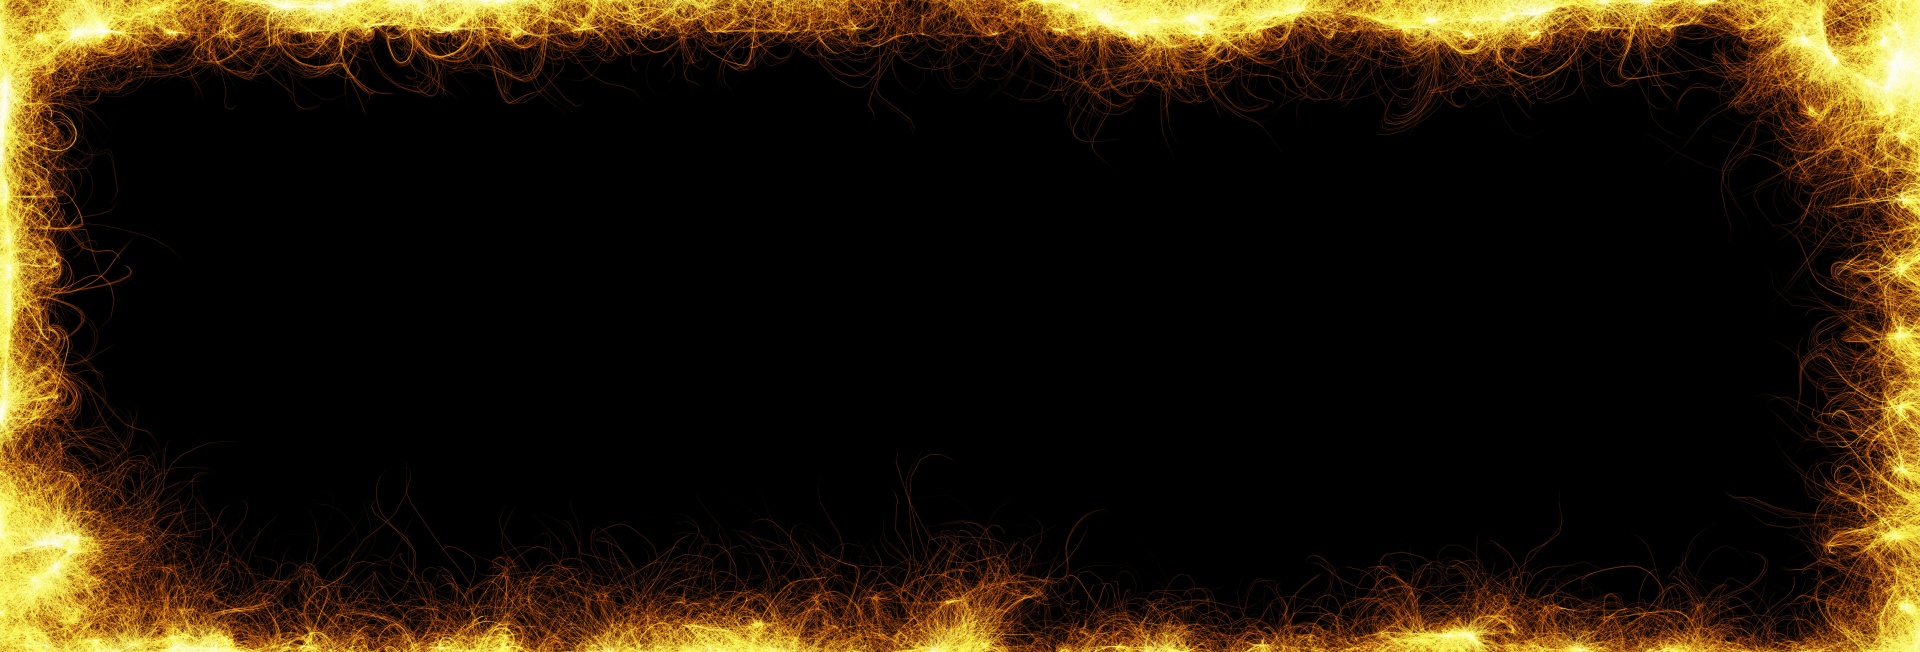 Download free photo of Banner,header,logo,background,fire - from ...